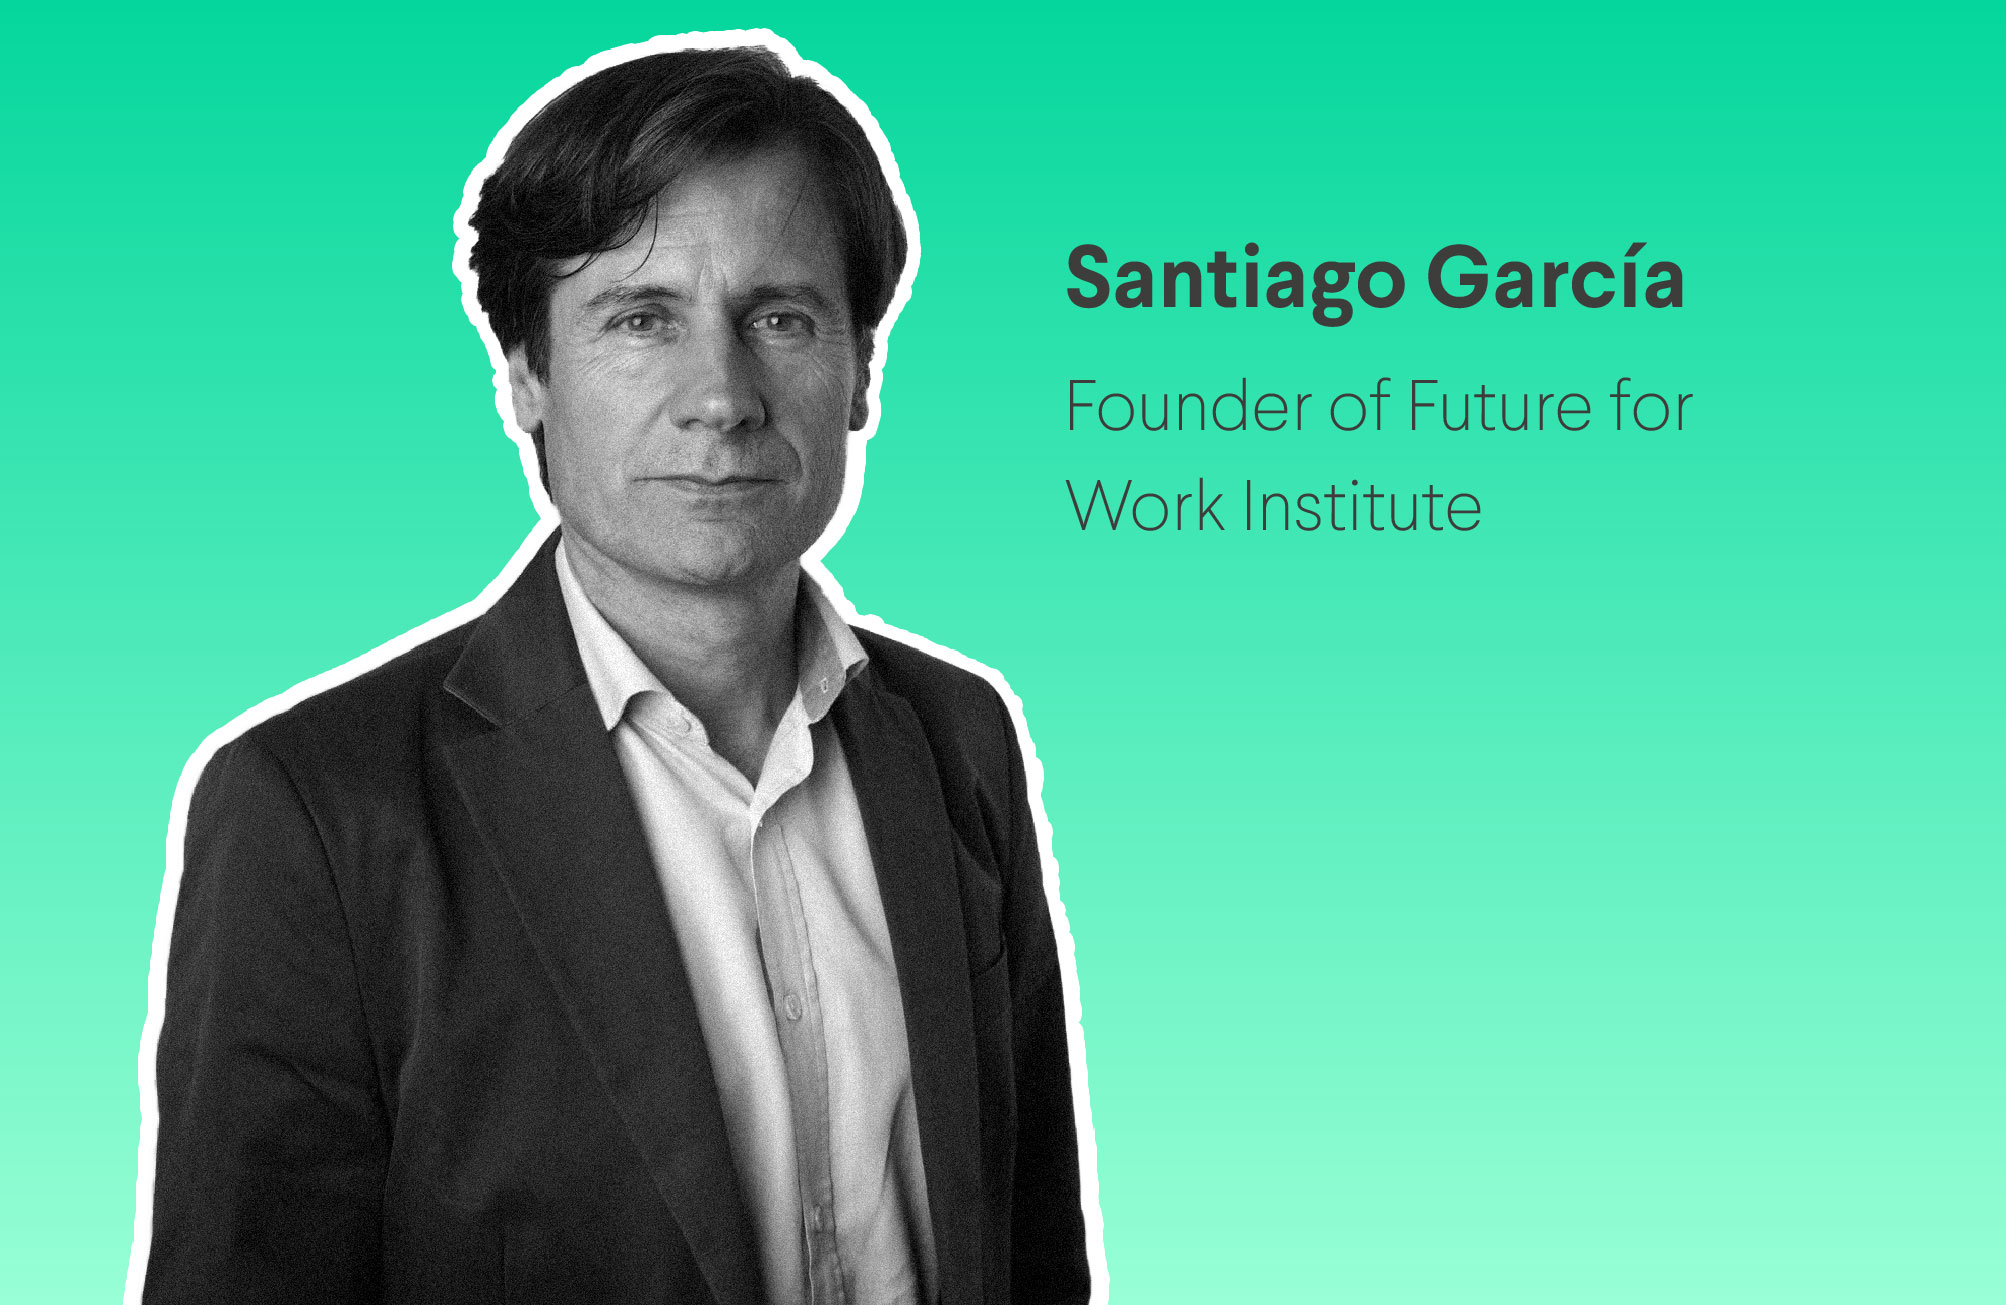 Santiago García: “I hope that a better future of work is possible for all.”